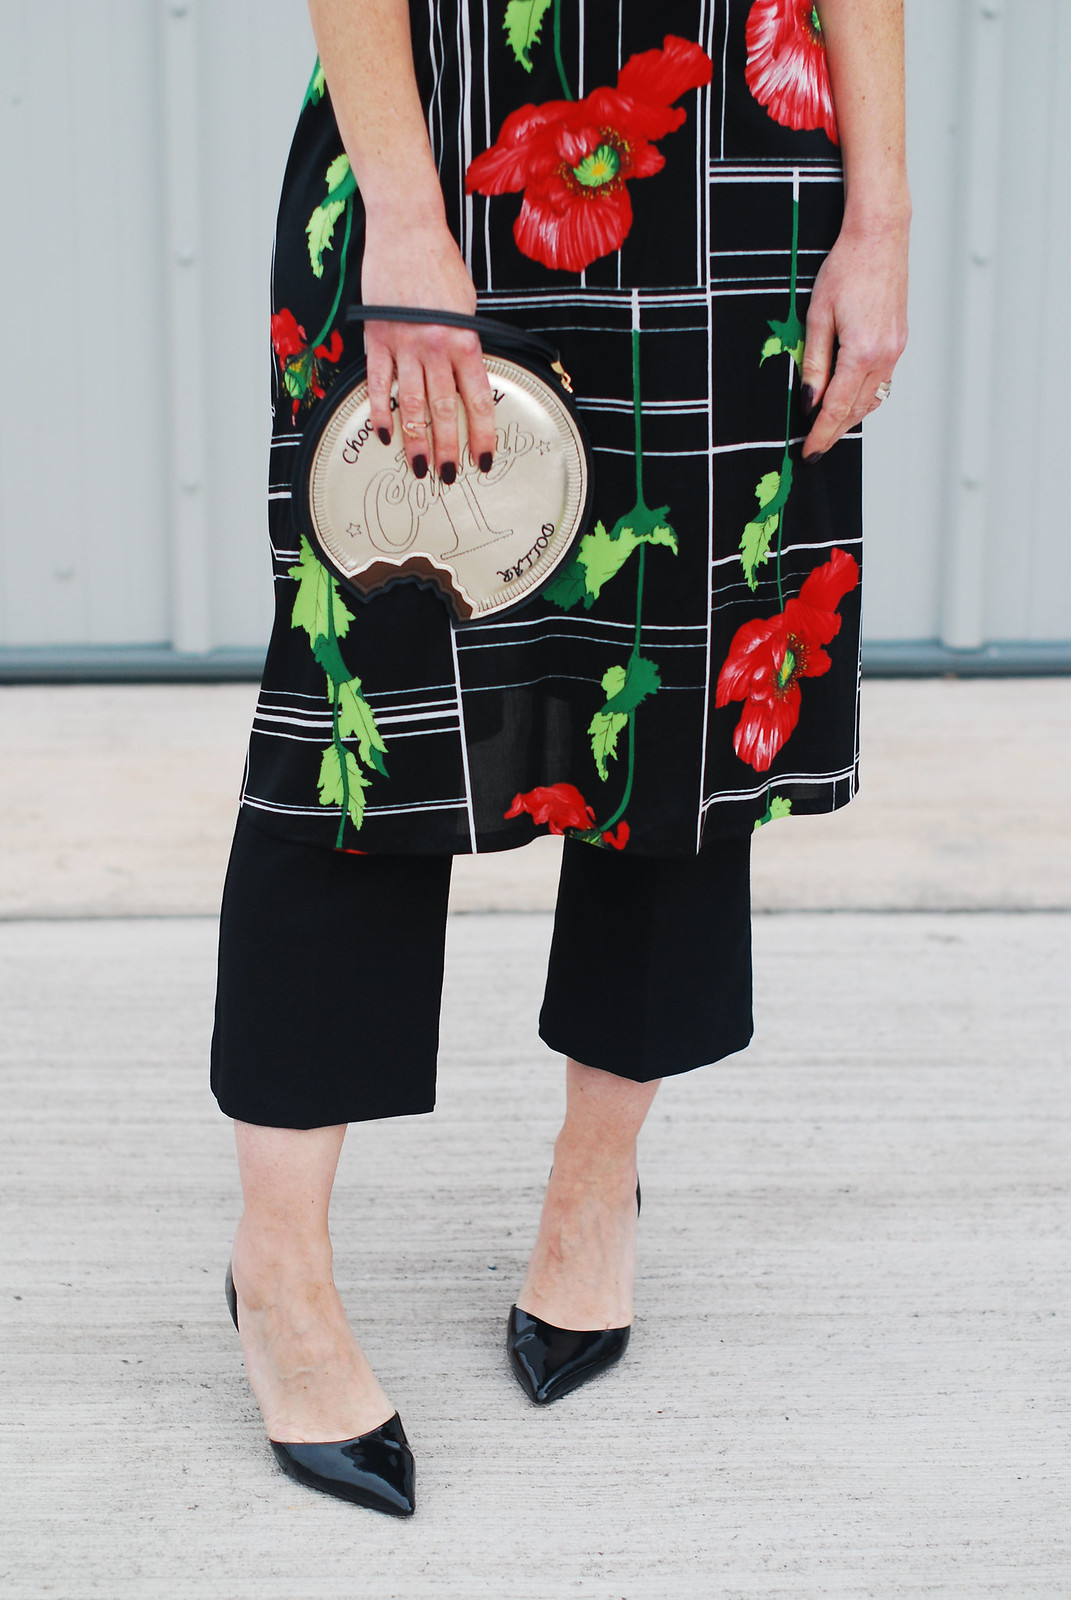 Cocktail dress code: A 1970s/80s vintage poppy print dress over flared cropped trousers | Not Dressed As Lamb, over 40 style